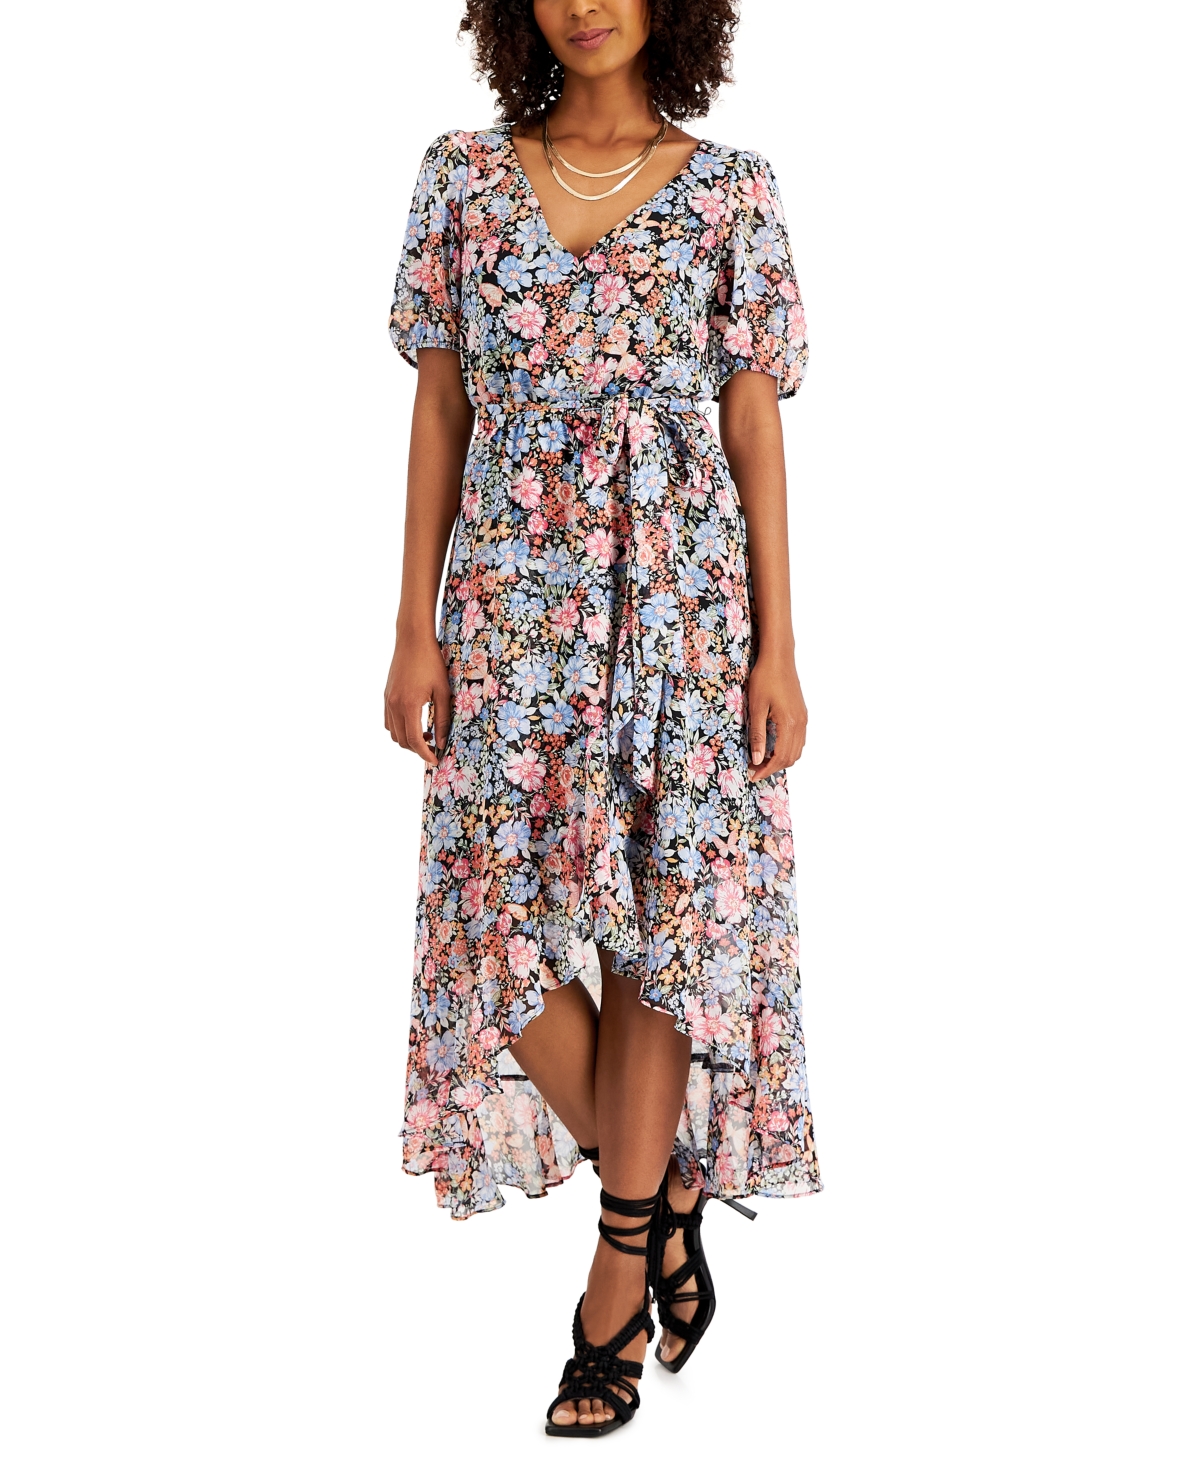 Inc International Concepts Printed Ruffled Faux-Wrap Dress, Created for Macy's